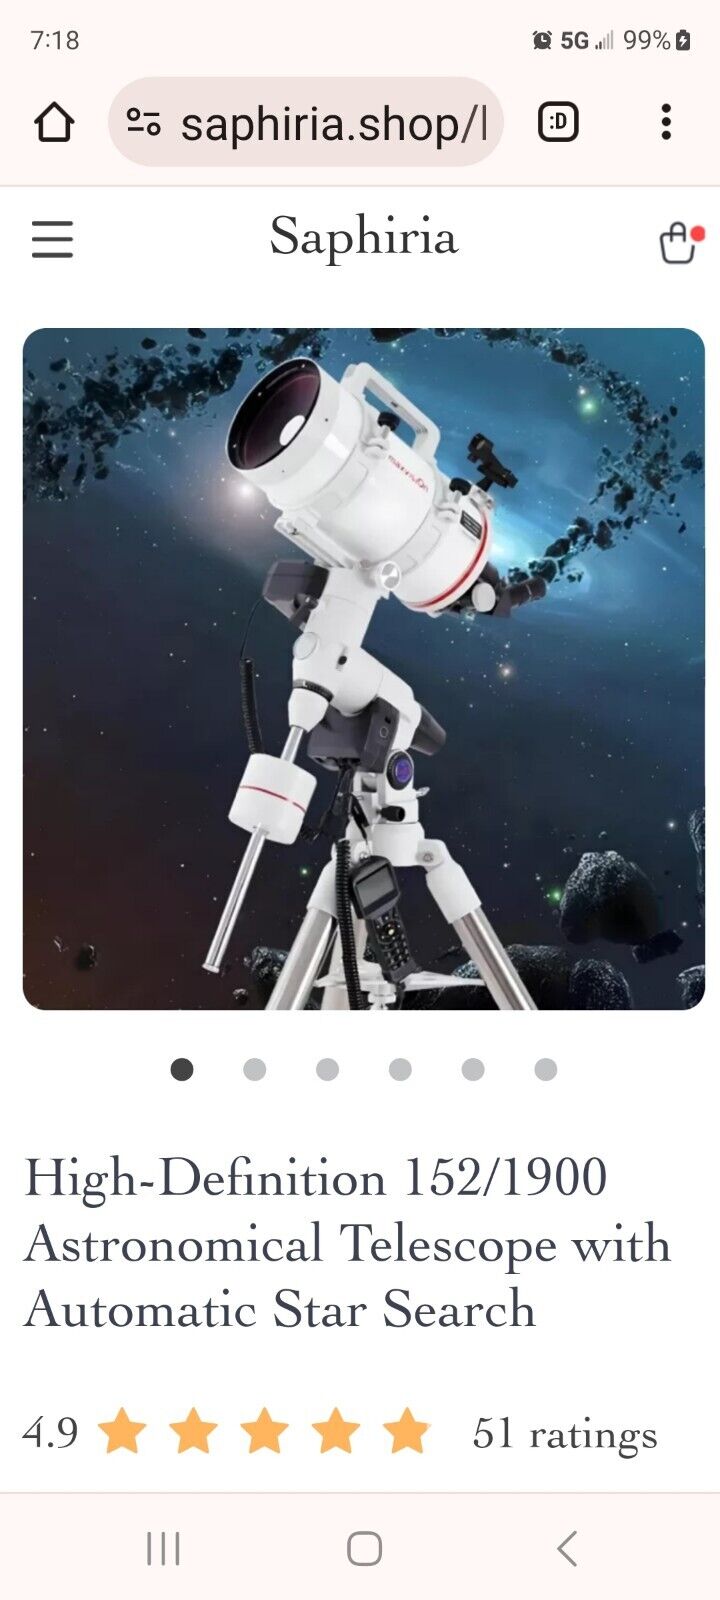 Professional Astronomical Telescope with High Tripod Lunar Mirror HD Viewing